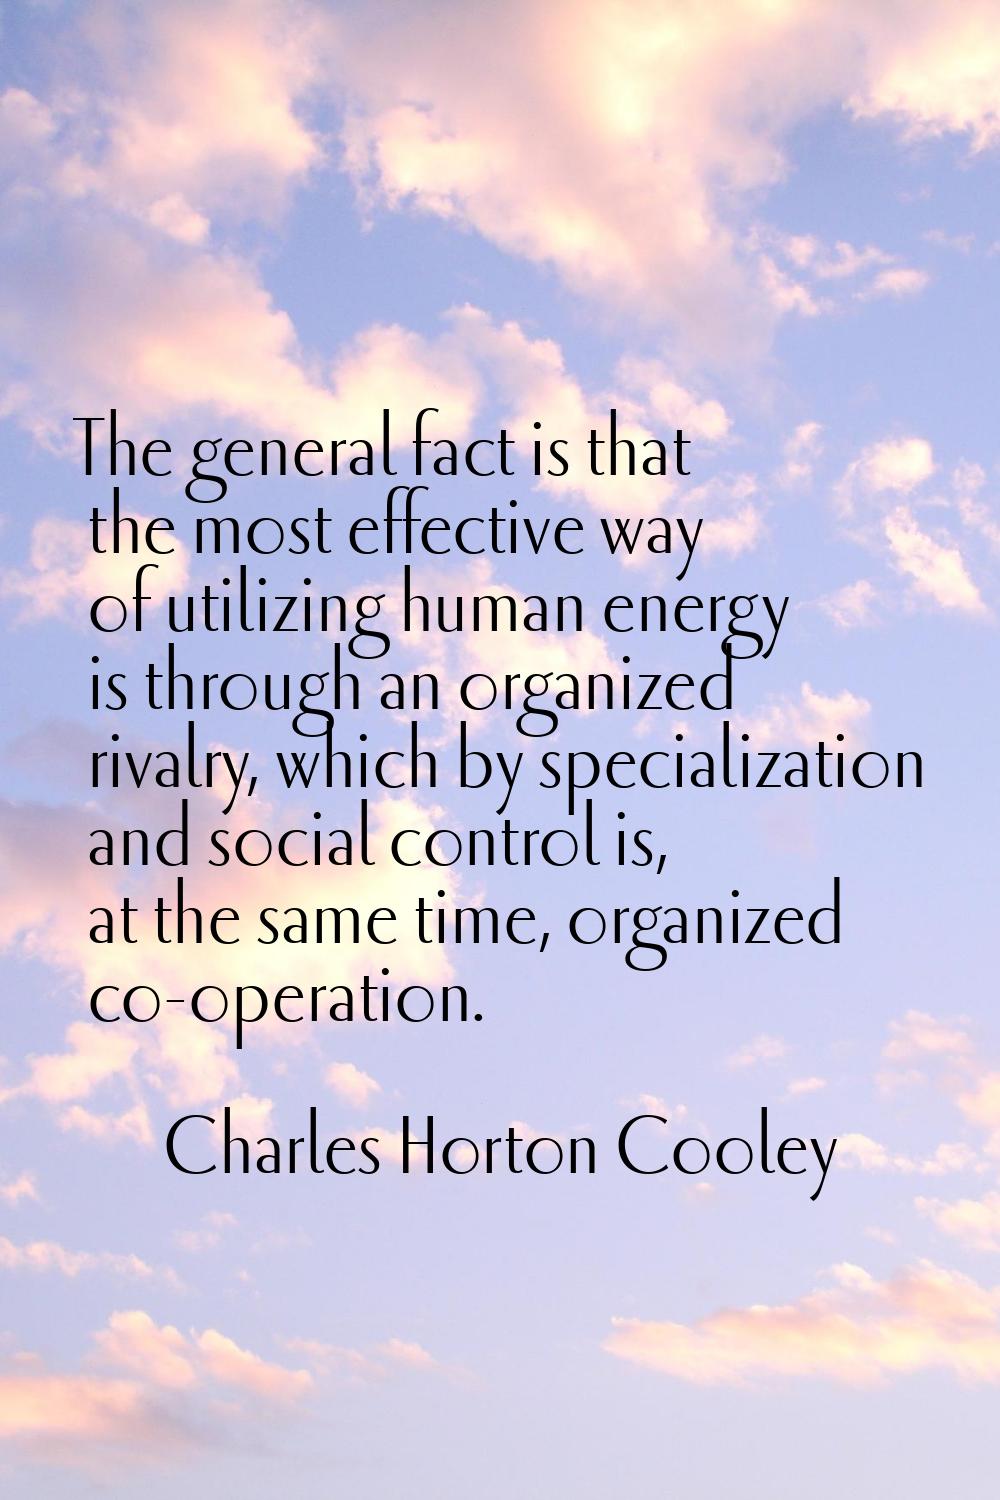 The general fact is that the most effective way of utilizing human energy is through an organized r